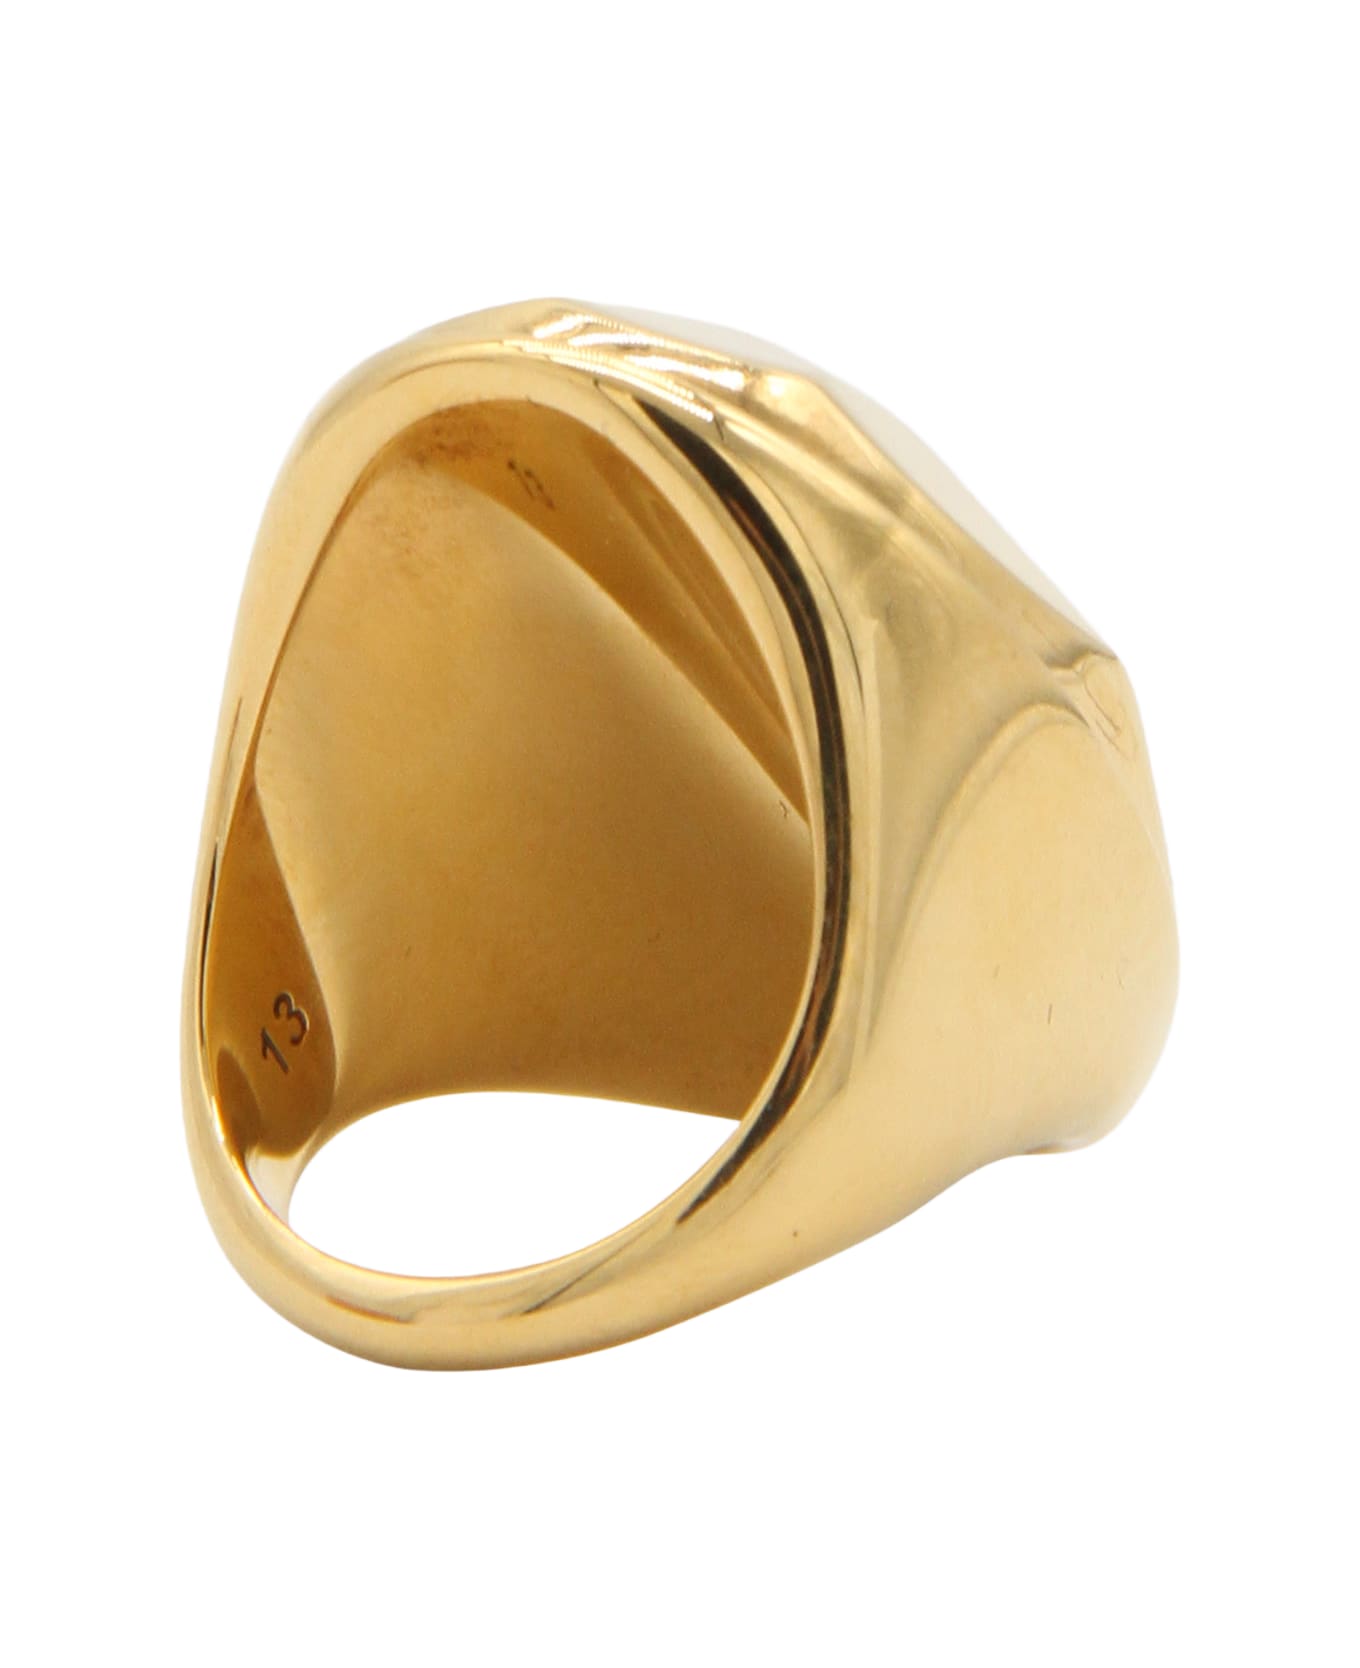 Alexander McQueen Antique Gold Metal The Faceted Stone Ring - Golden